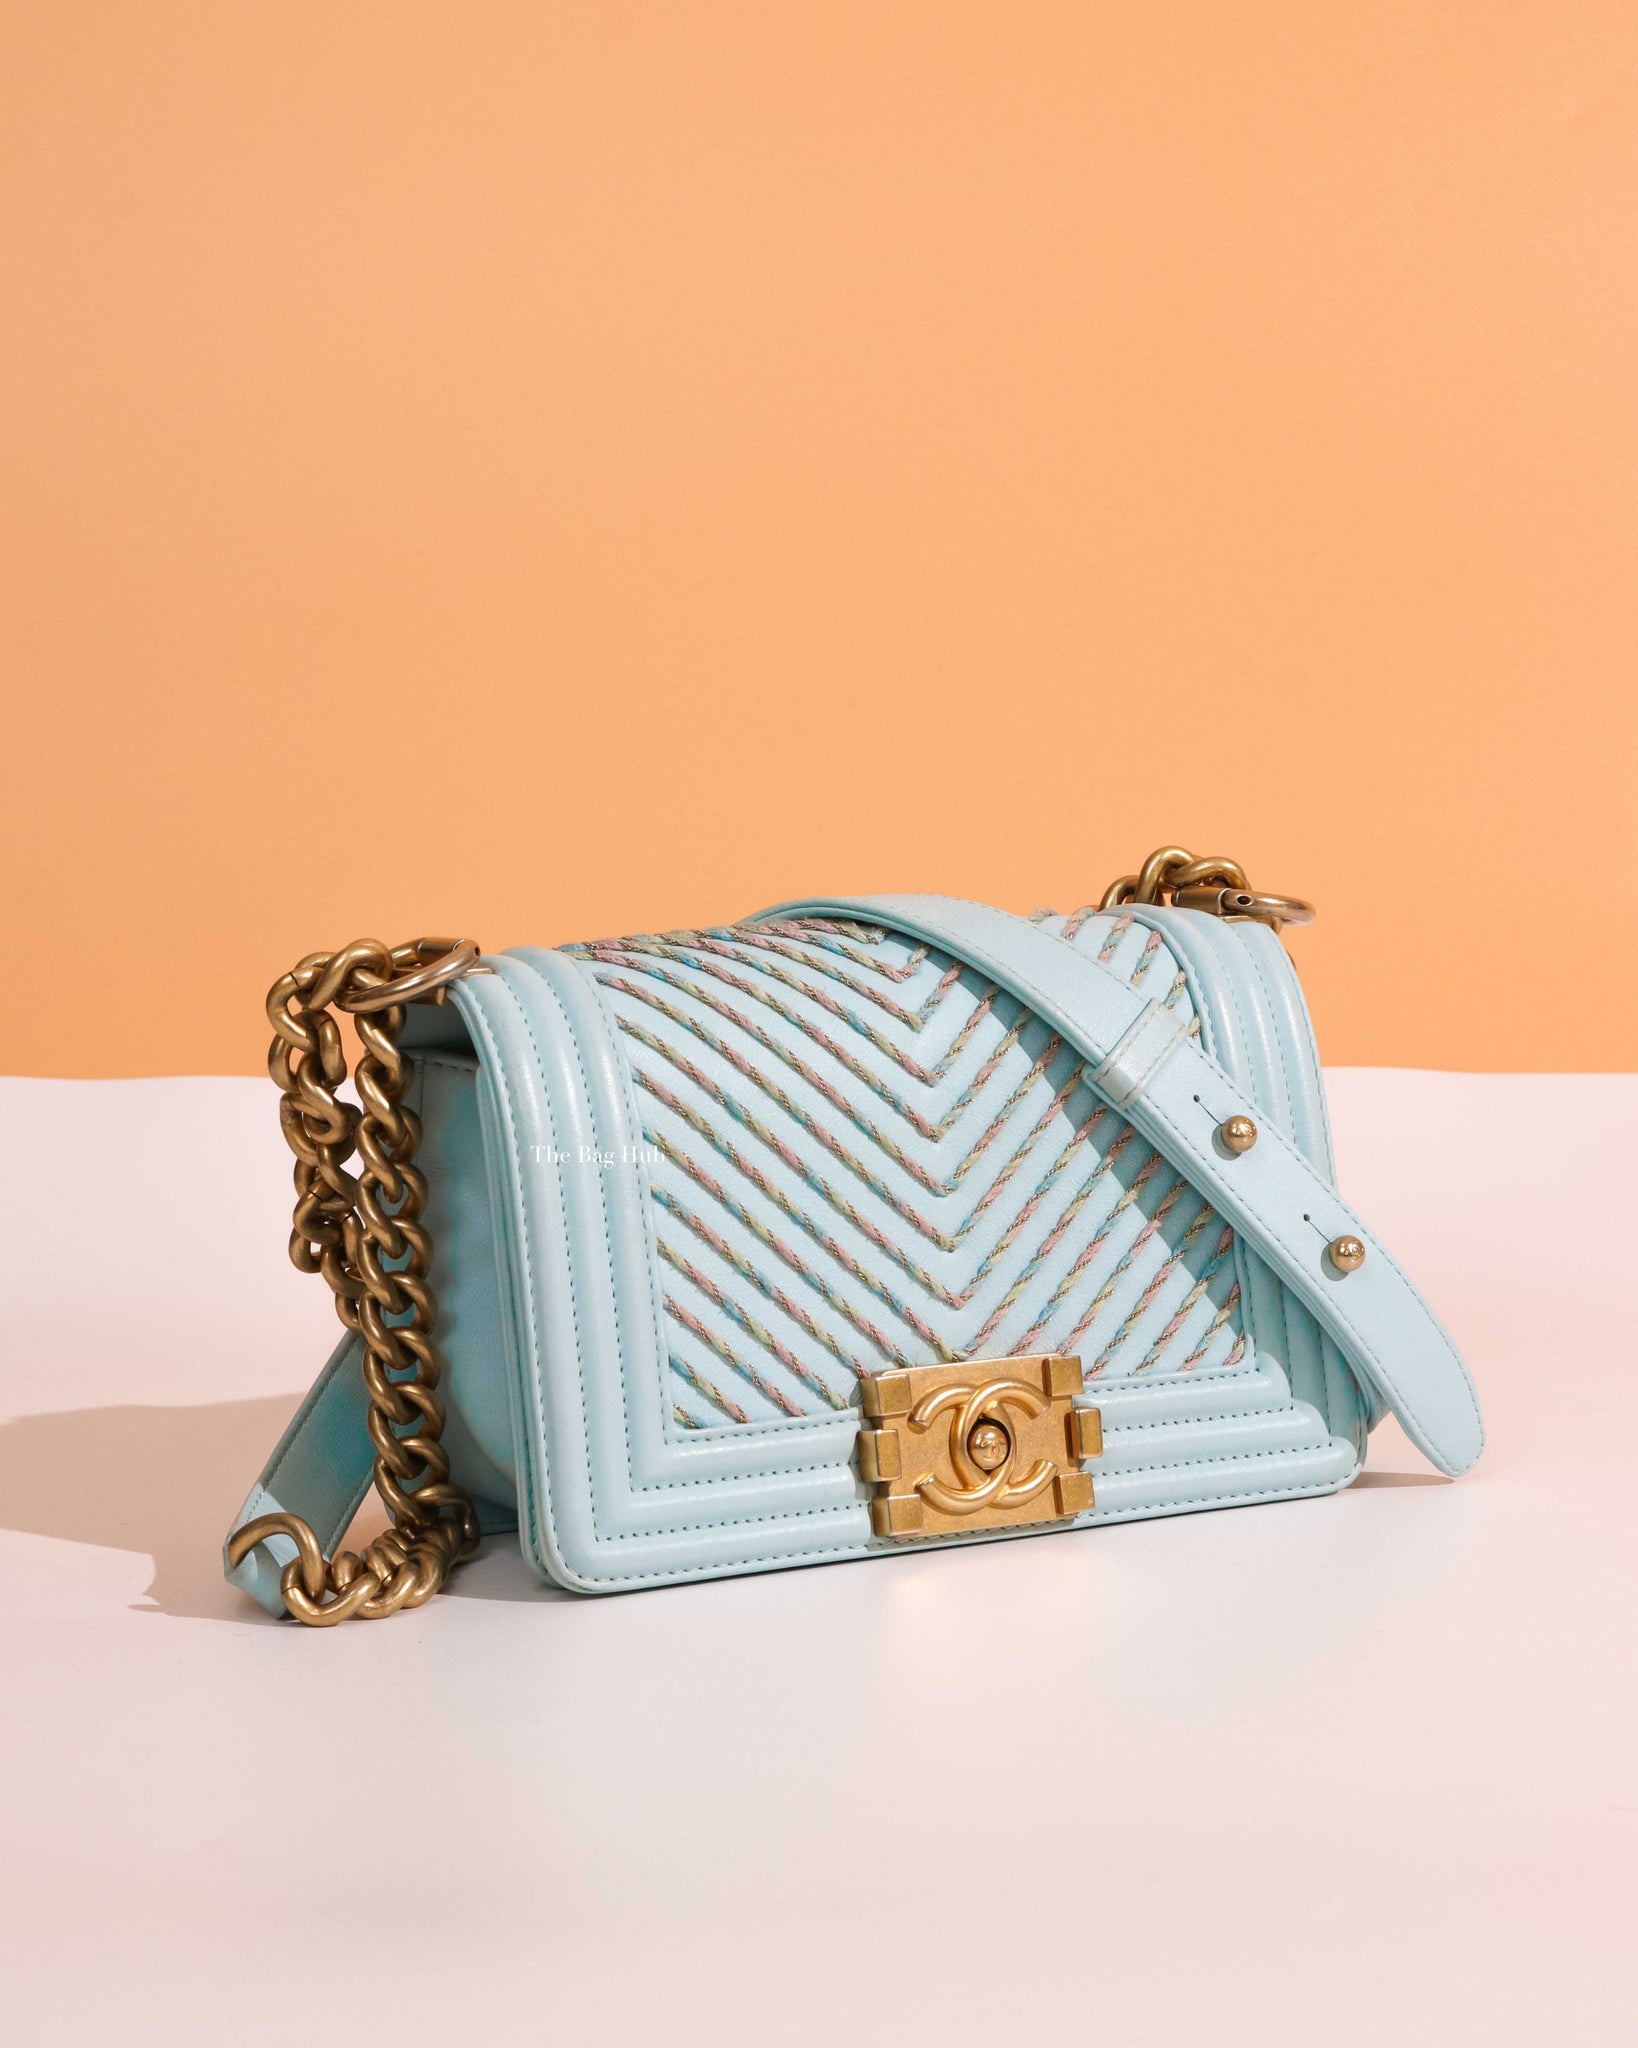 Chanel Light Blue Chevron Embroidered By The Sea Small Le Boy Bag GHW, Designer Brand, Authentic Chanel